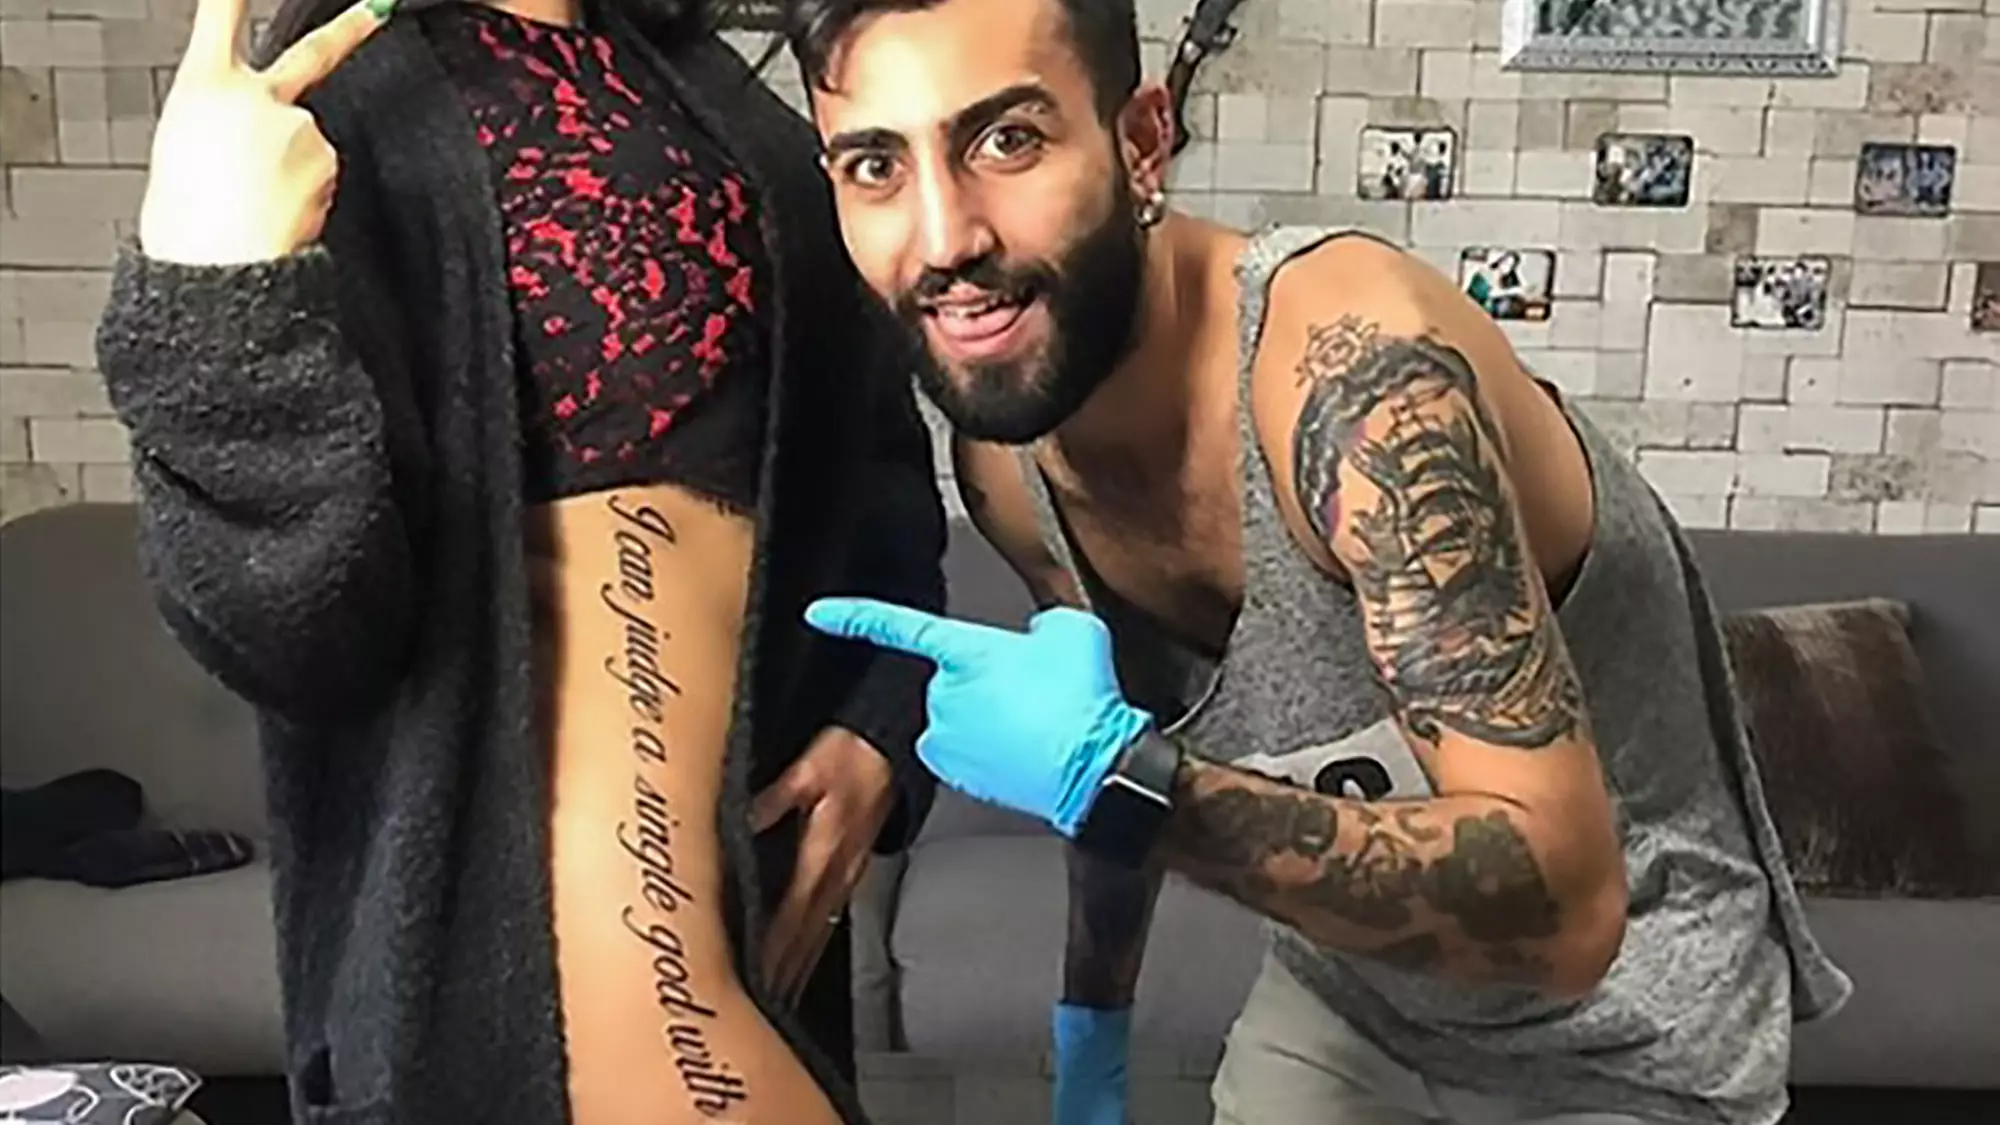 Instagram Model Becomes Laughing Stock With Badly Translated Tattoo